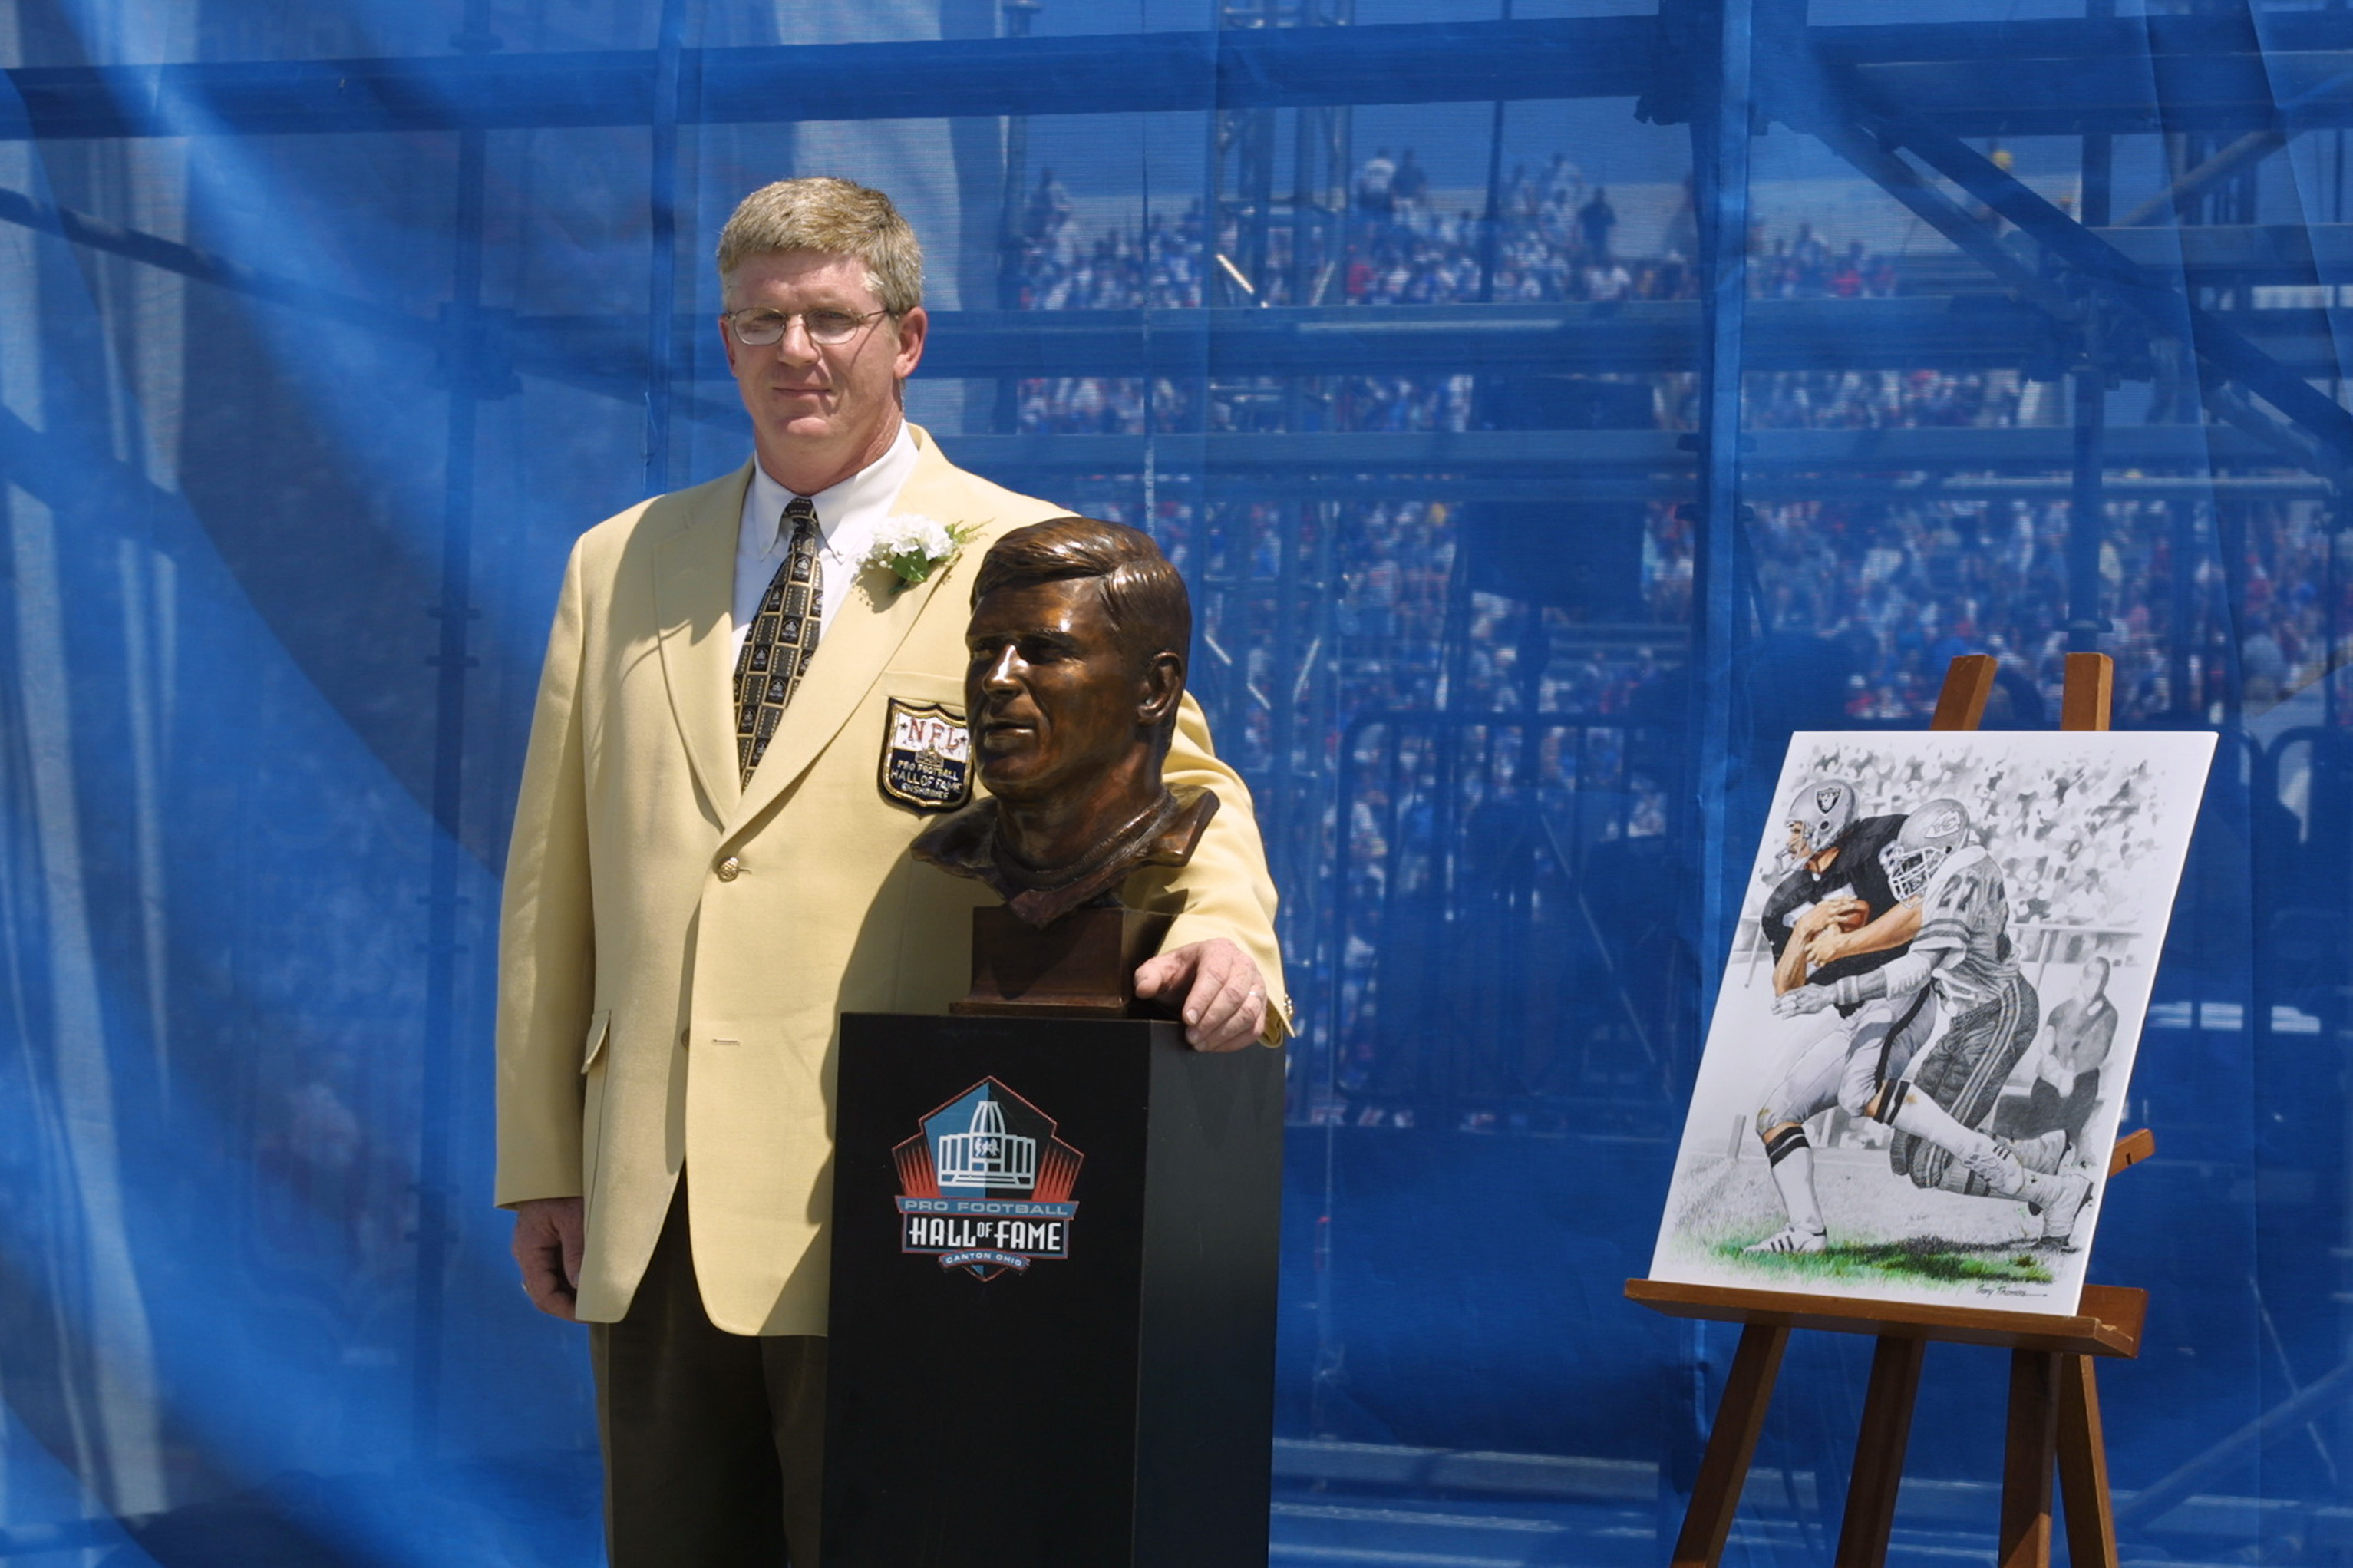 CANTON, OHIO - AUGUST 3:  Dave Casper stands next to his bust and artwork after his induction into the National Football League Hall of Fame on August 3, 2002 at Fawcett Stadium in Canton, Ohio.  Dave Casper played tight end from 1974 to 1984 for the Oakl